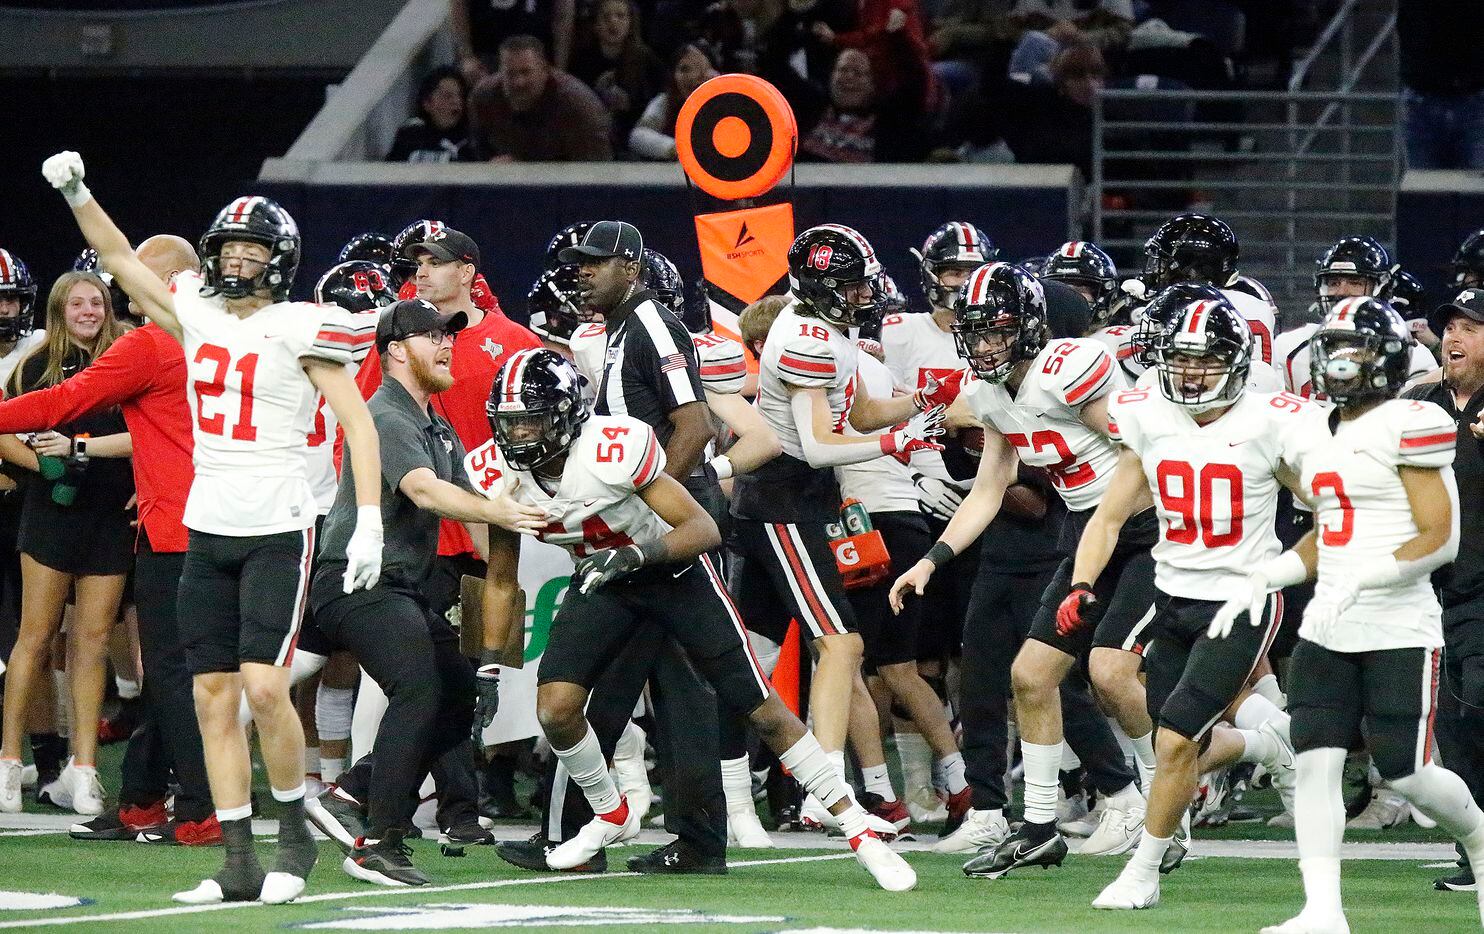 Lovejoy High School reacts to a defensive stop to ensure victory late in the second half as Lovejoy High School played Mansfield Timberview High School in a Class 5A Division II Region II semifinal football game at The Ford Center in Frisco on Friday night, November 21, 2021. (Stewart F. House/Special Contributor)